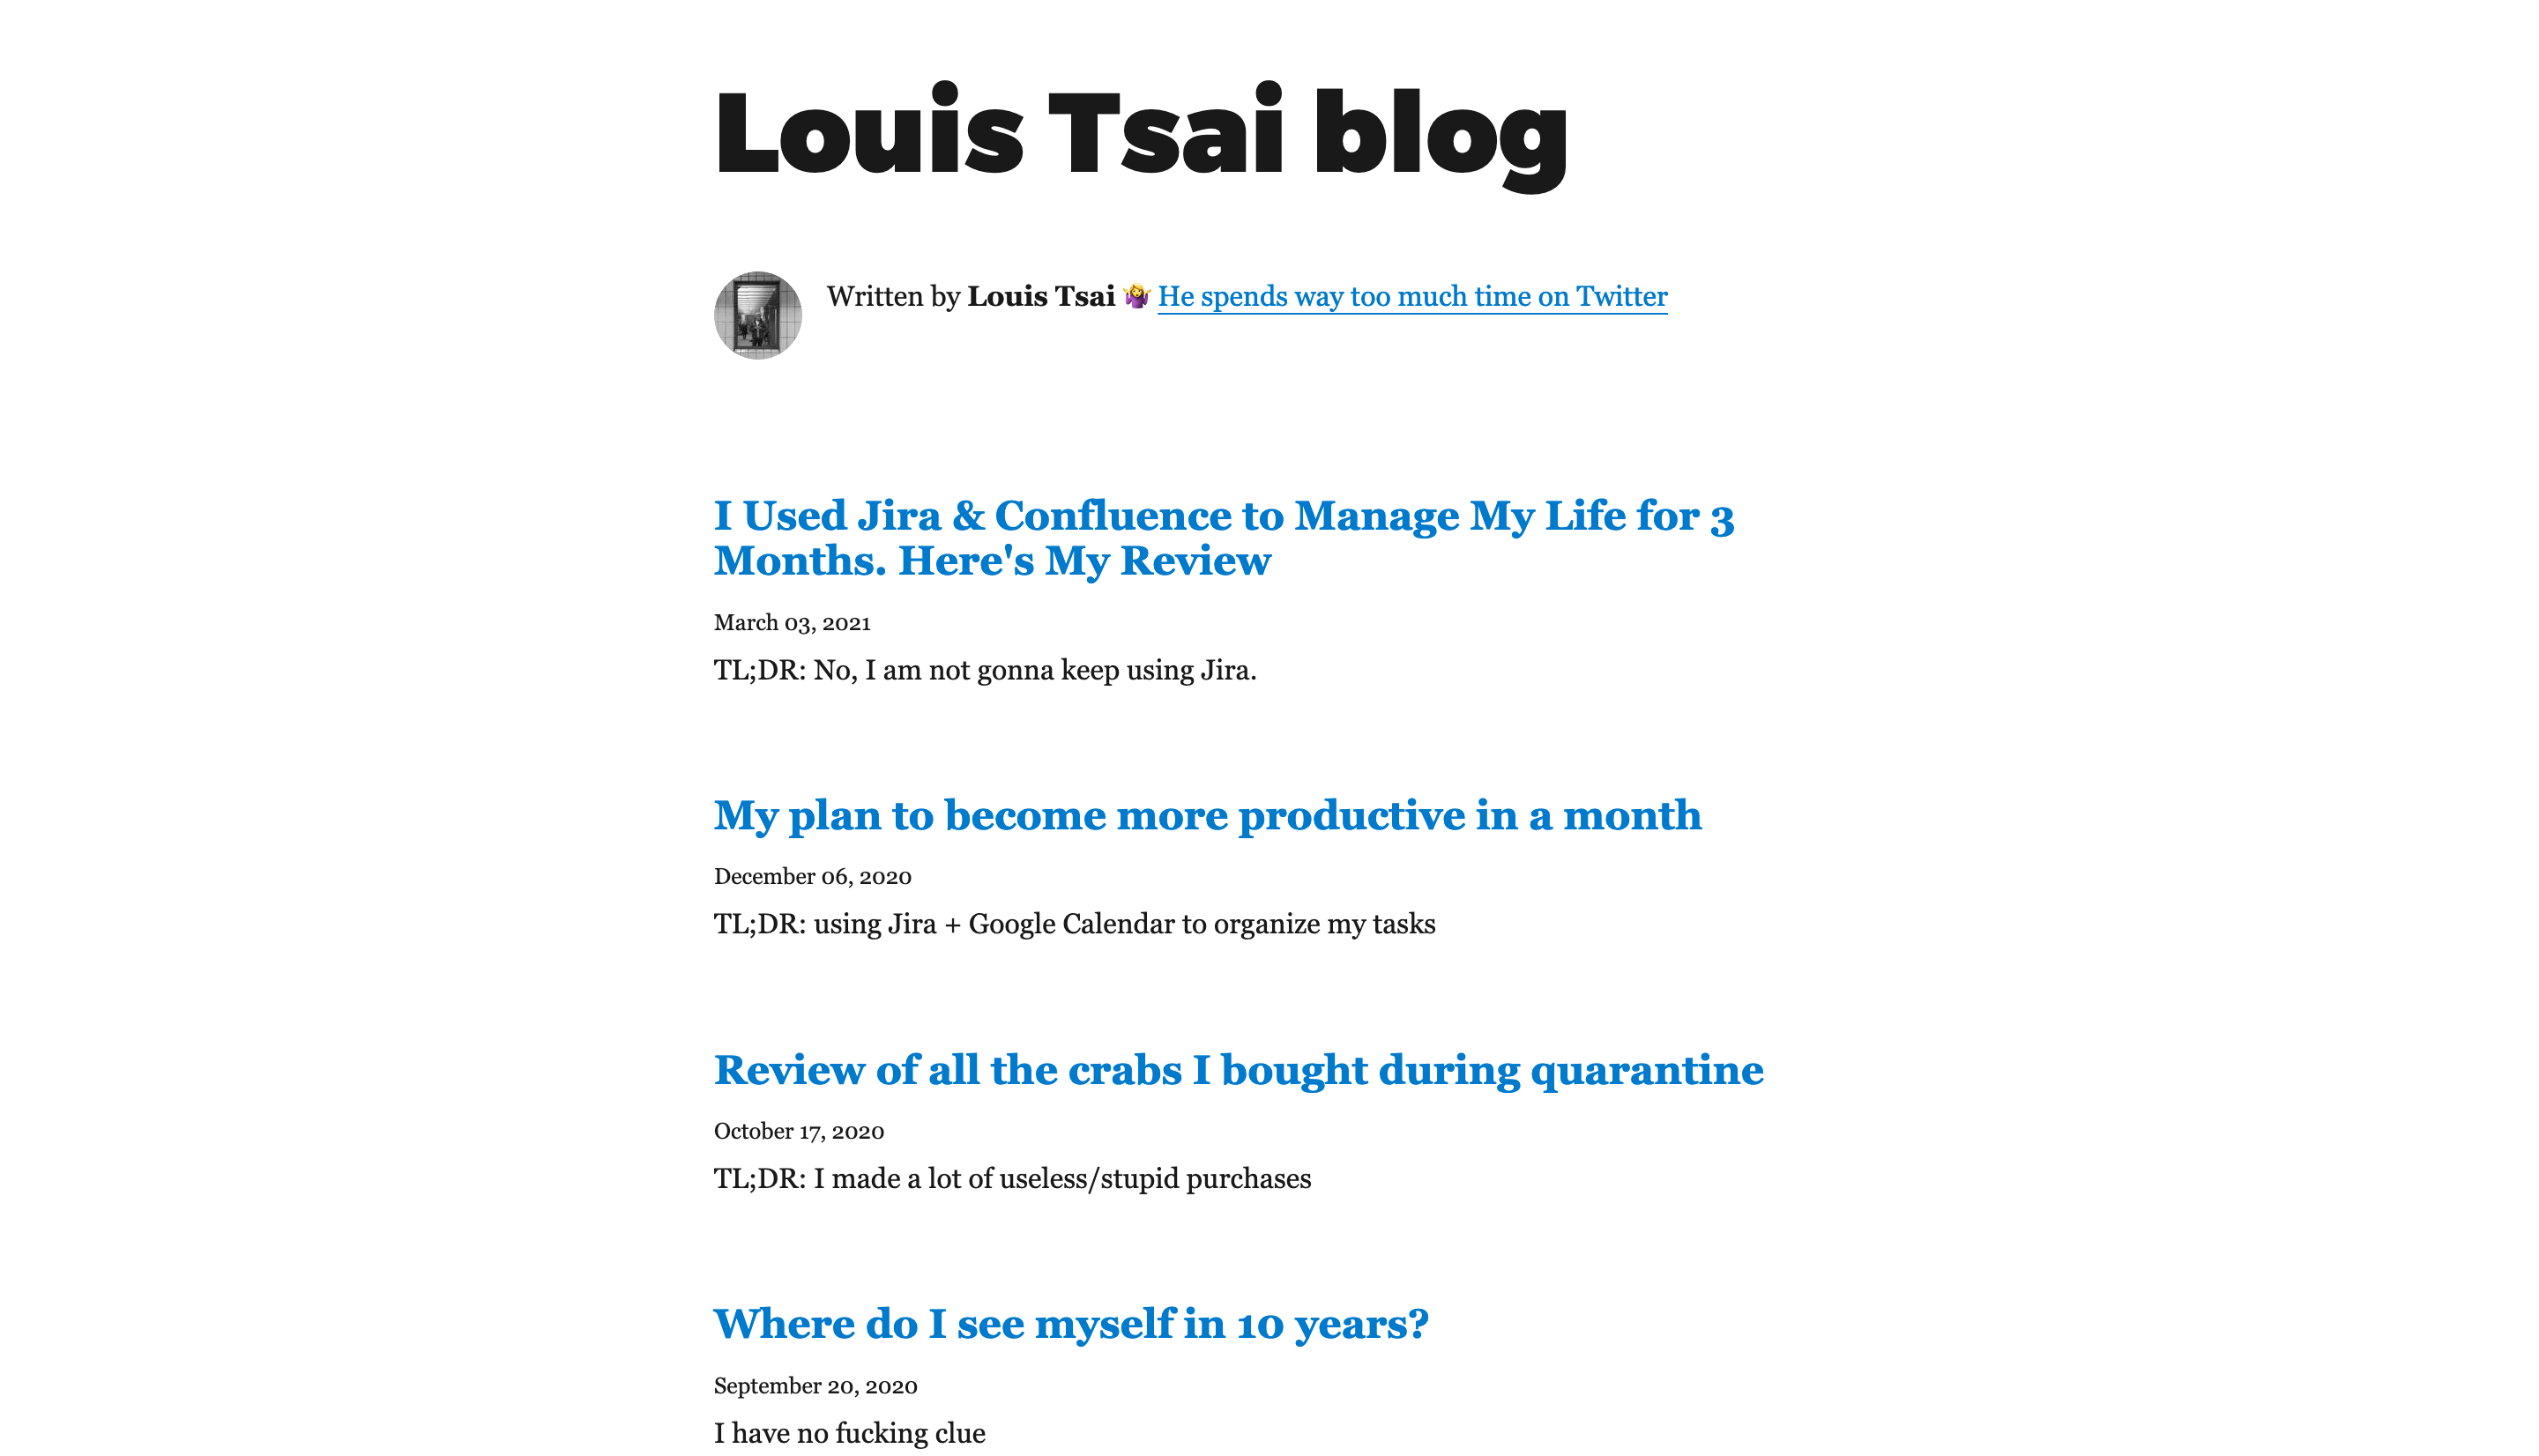 Screenshot of "Louis Tsai blog", which only has a series of blog post title and headline. The whole page is super plain.